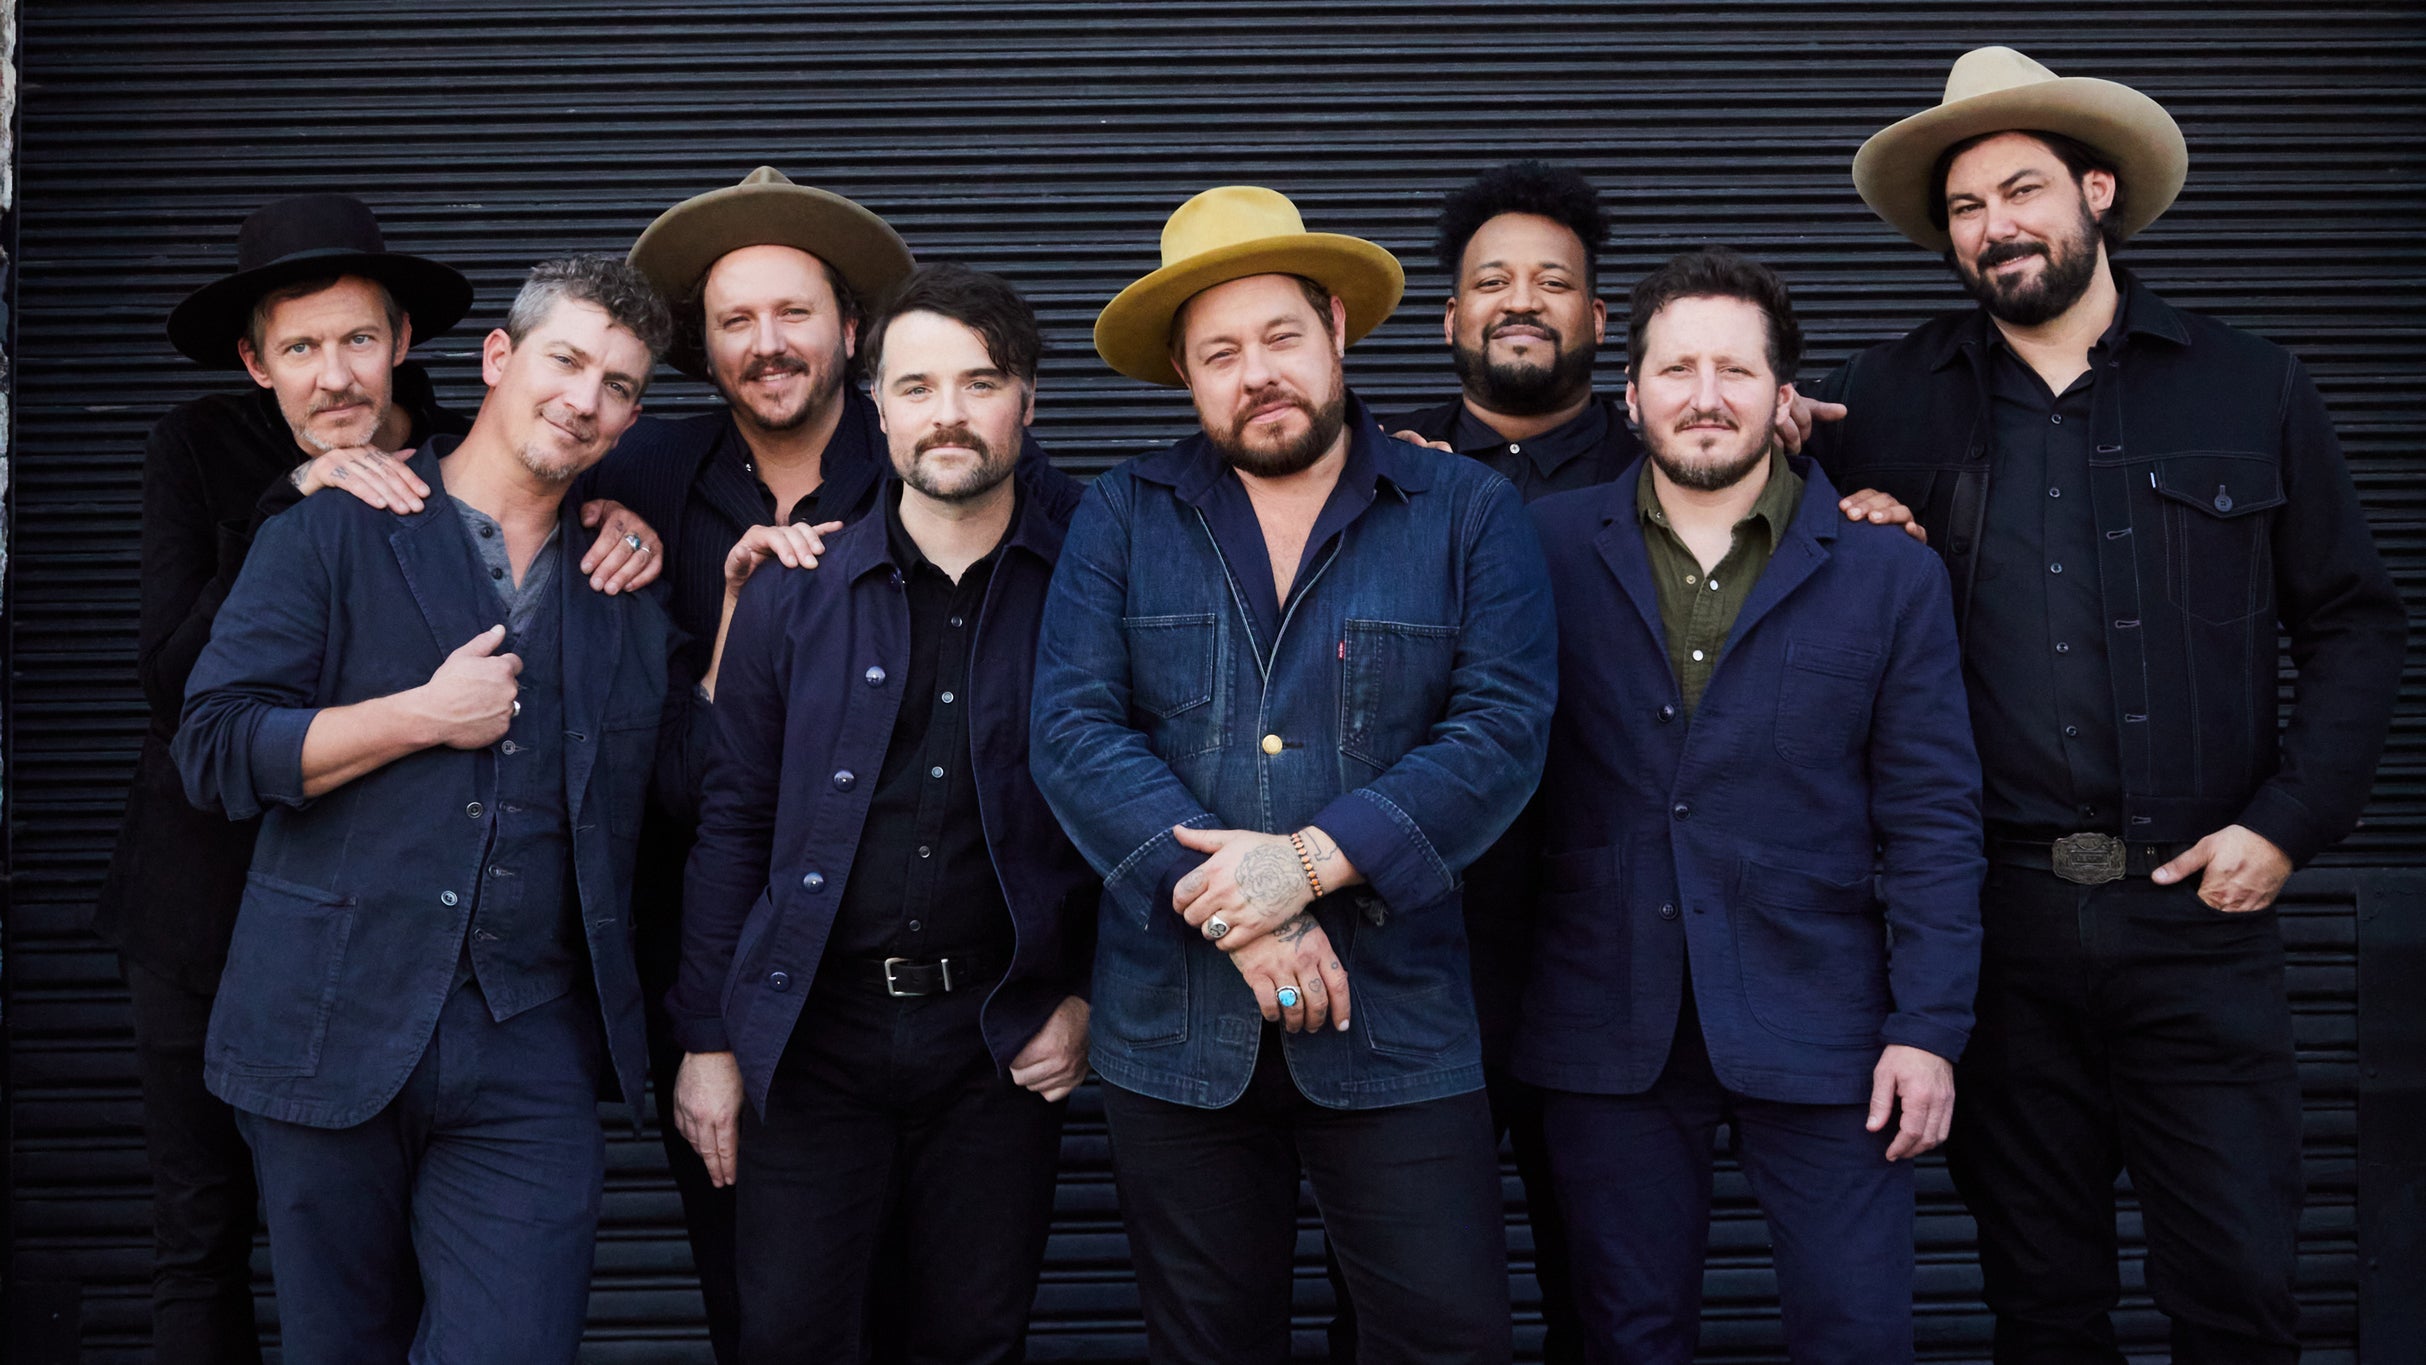 members only presale code for Eye To Eye Tour - Nathaniel Rateliff & TNS and My Morning Jacket presale tickets in Wilmington